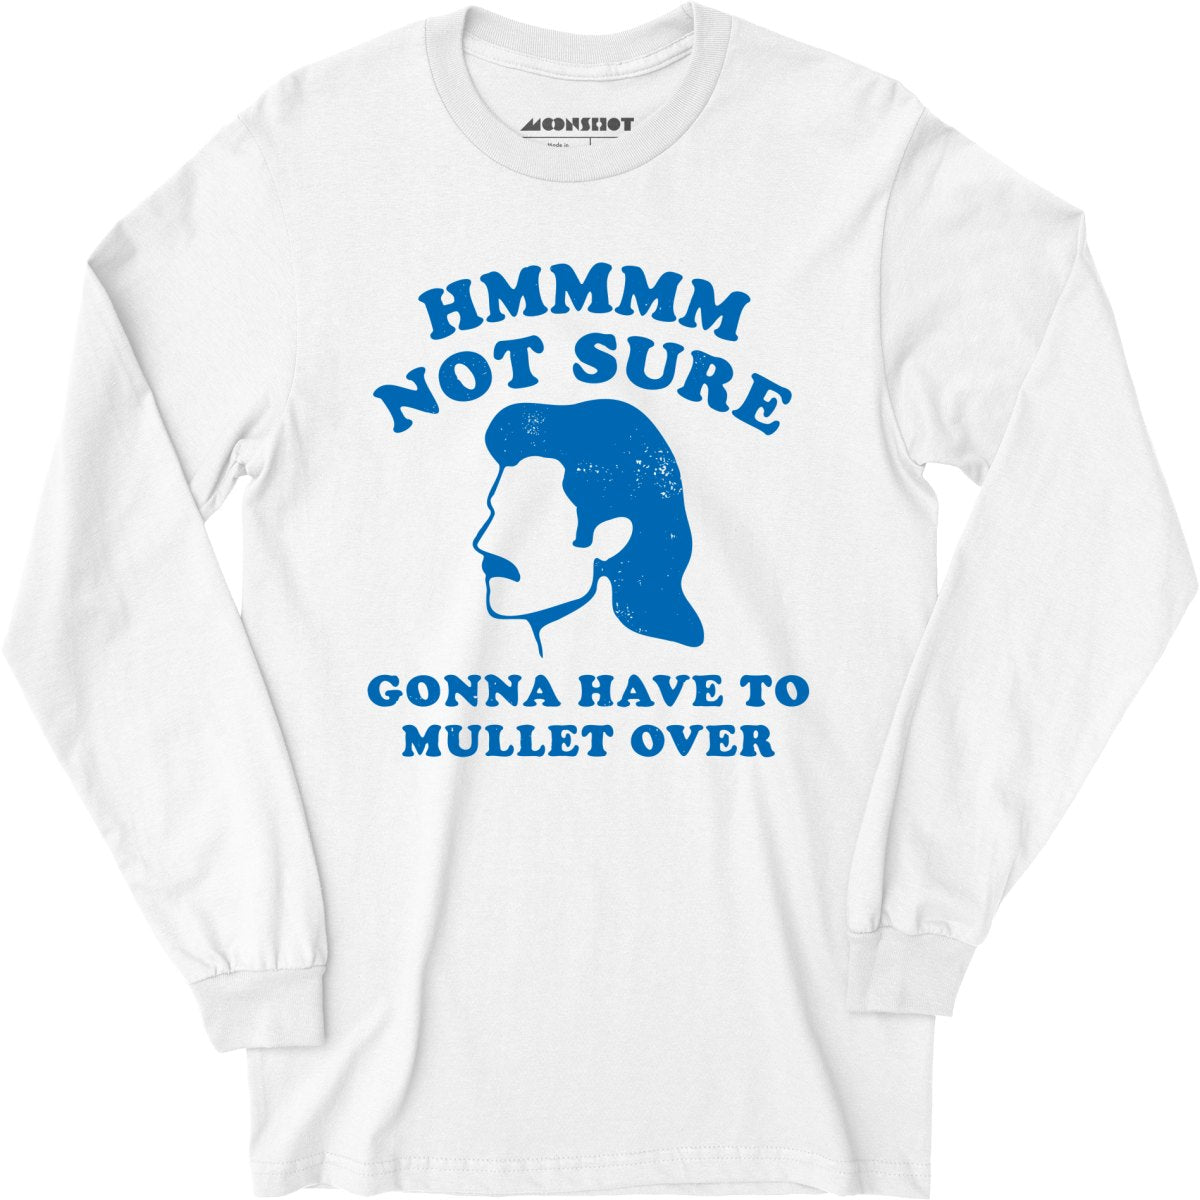 Gonna Have to Mullet Over - Long Sleeve T-Shirt